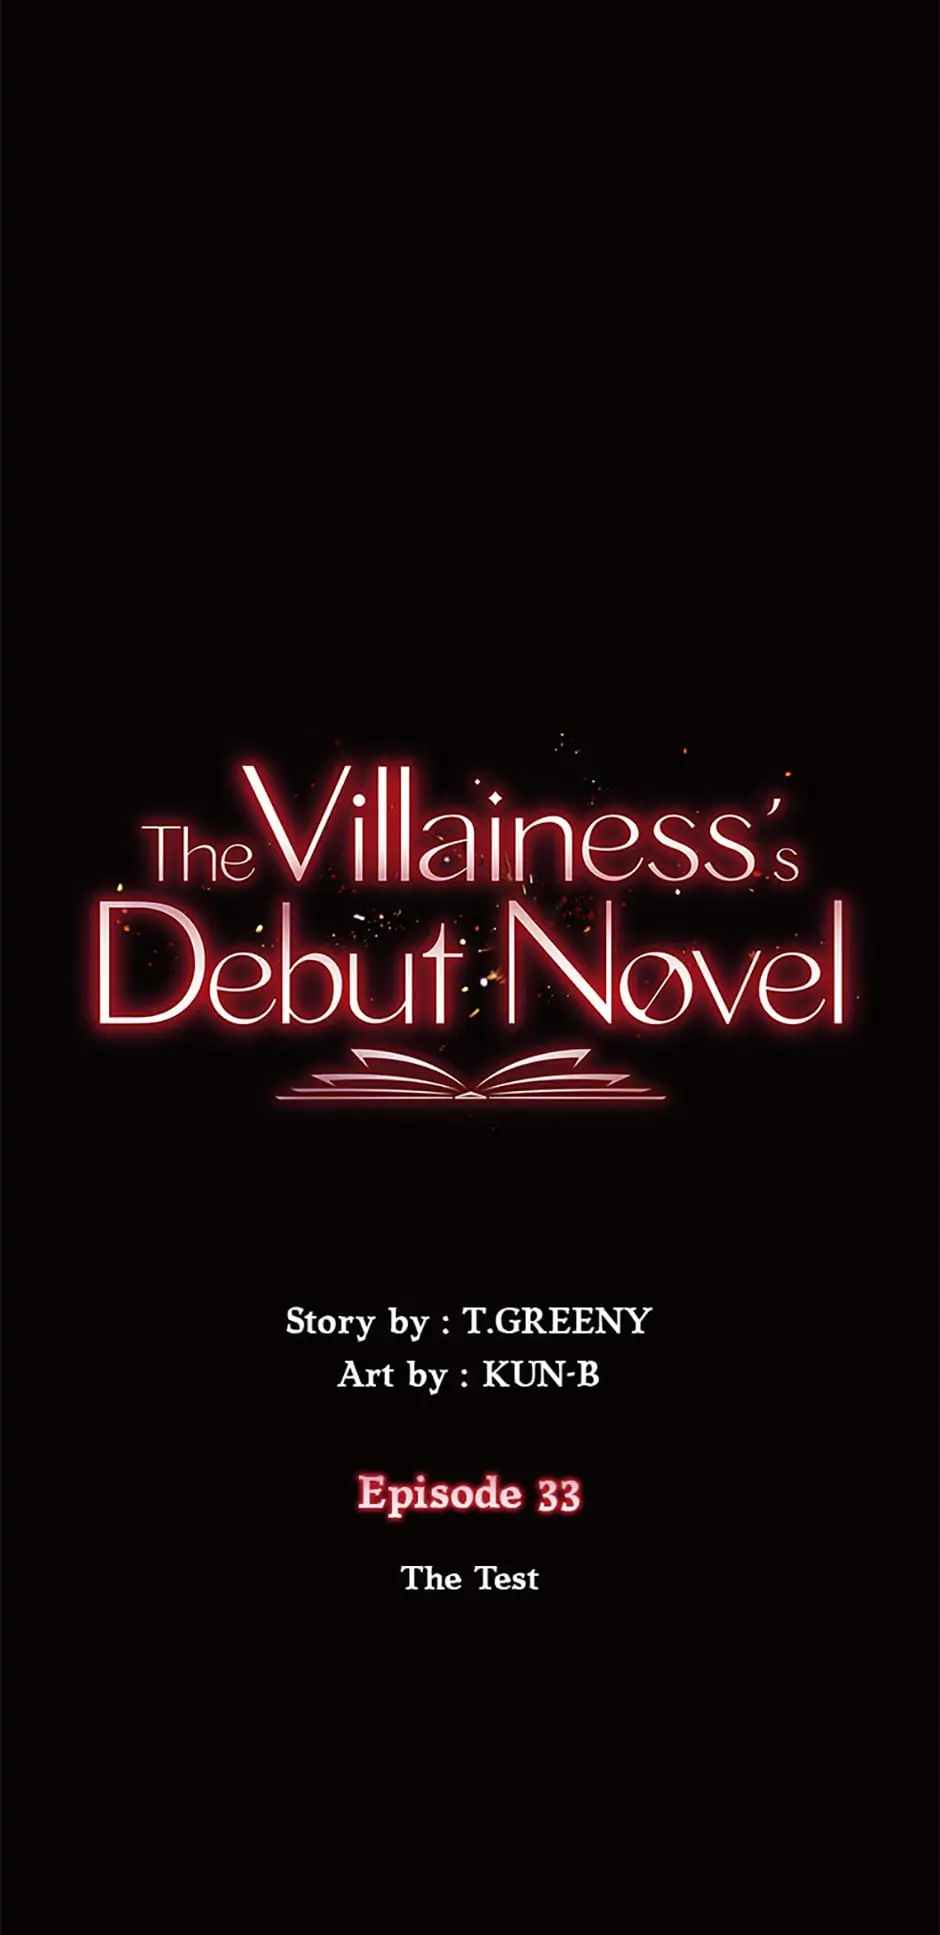 The Villainess’s Debut chapter 33